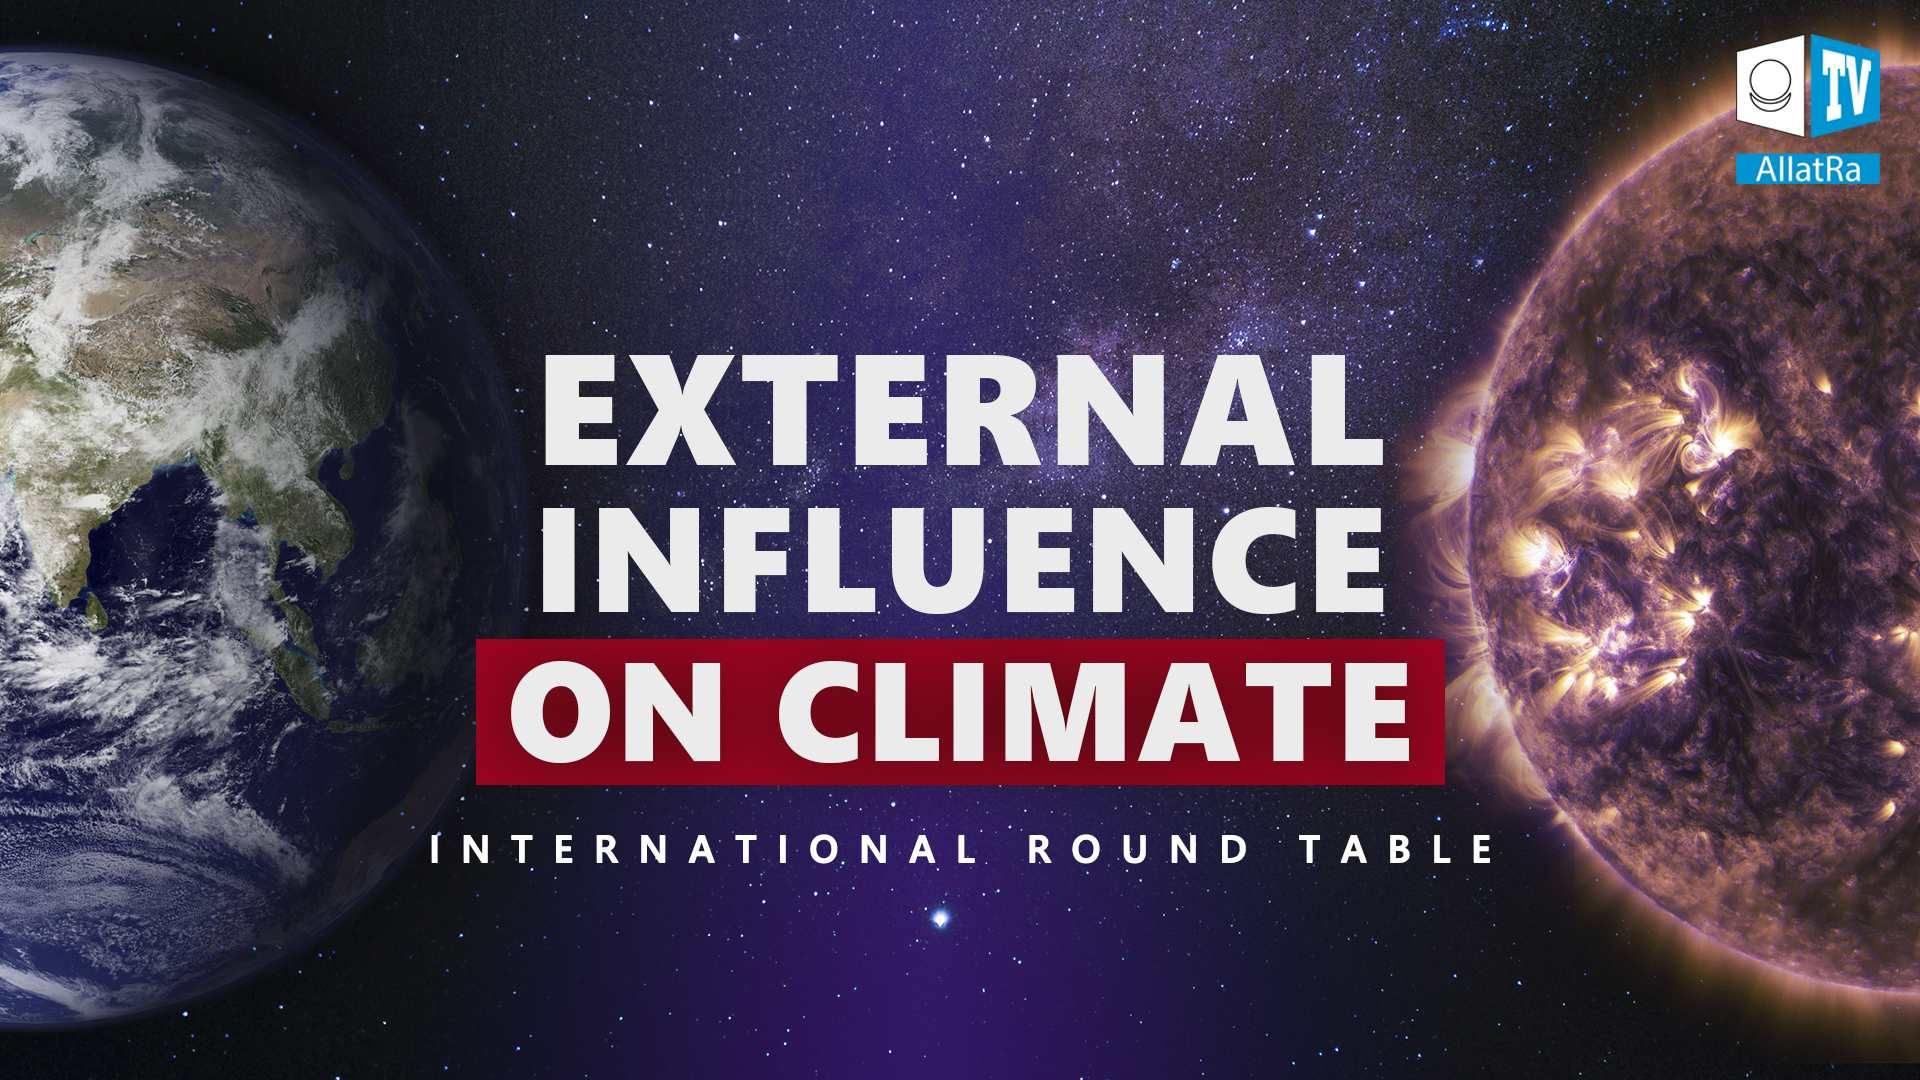 Impact of Outer Space on Climate. How to Preserve Life on the Planet Earth? | International Round Table